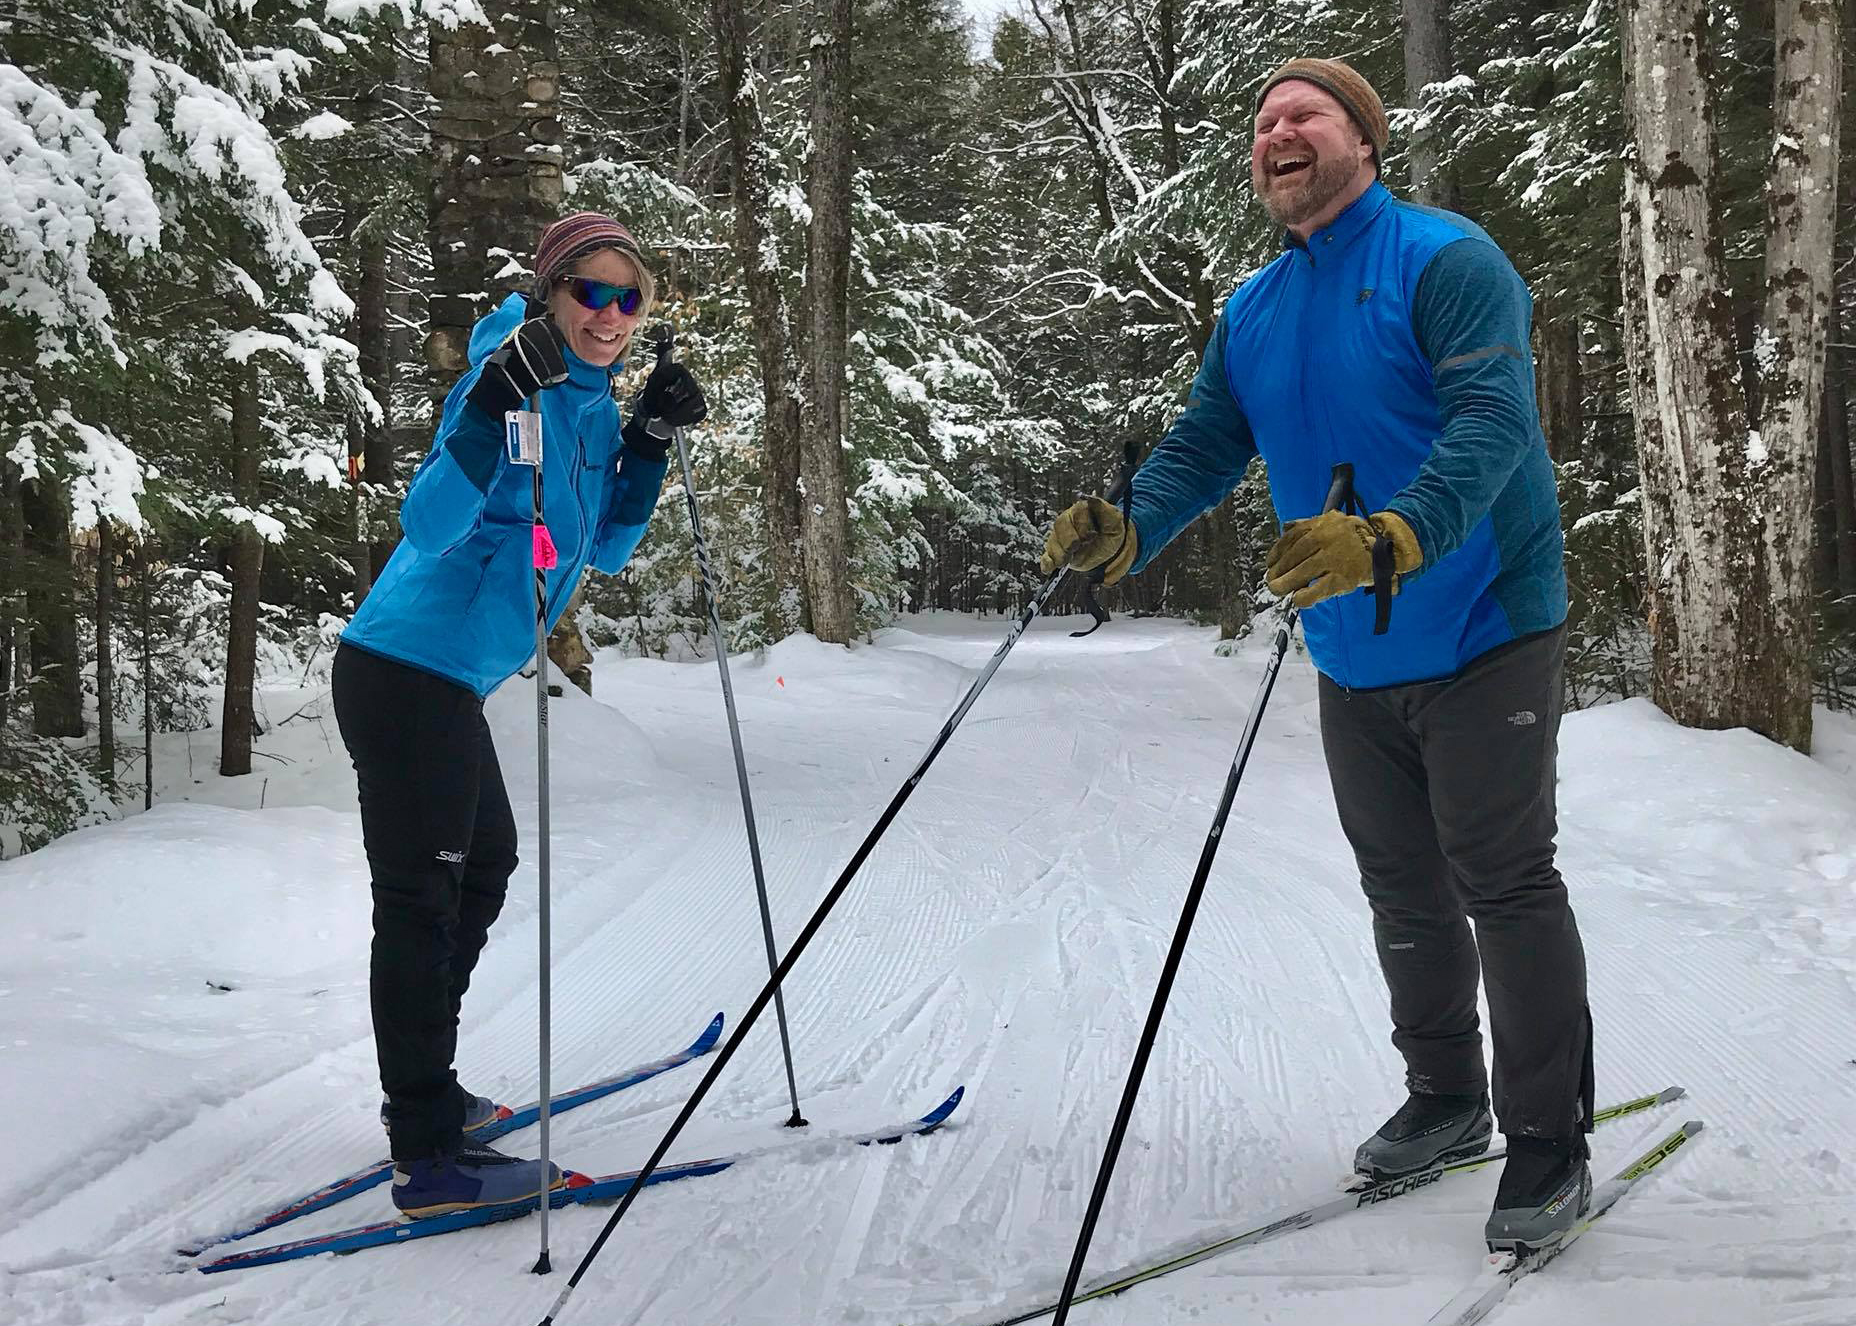 A man and a woman on cross country skis in a forest